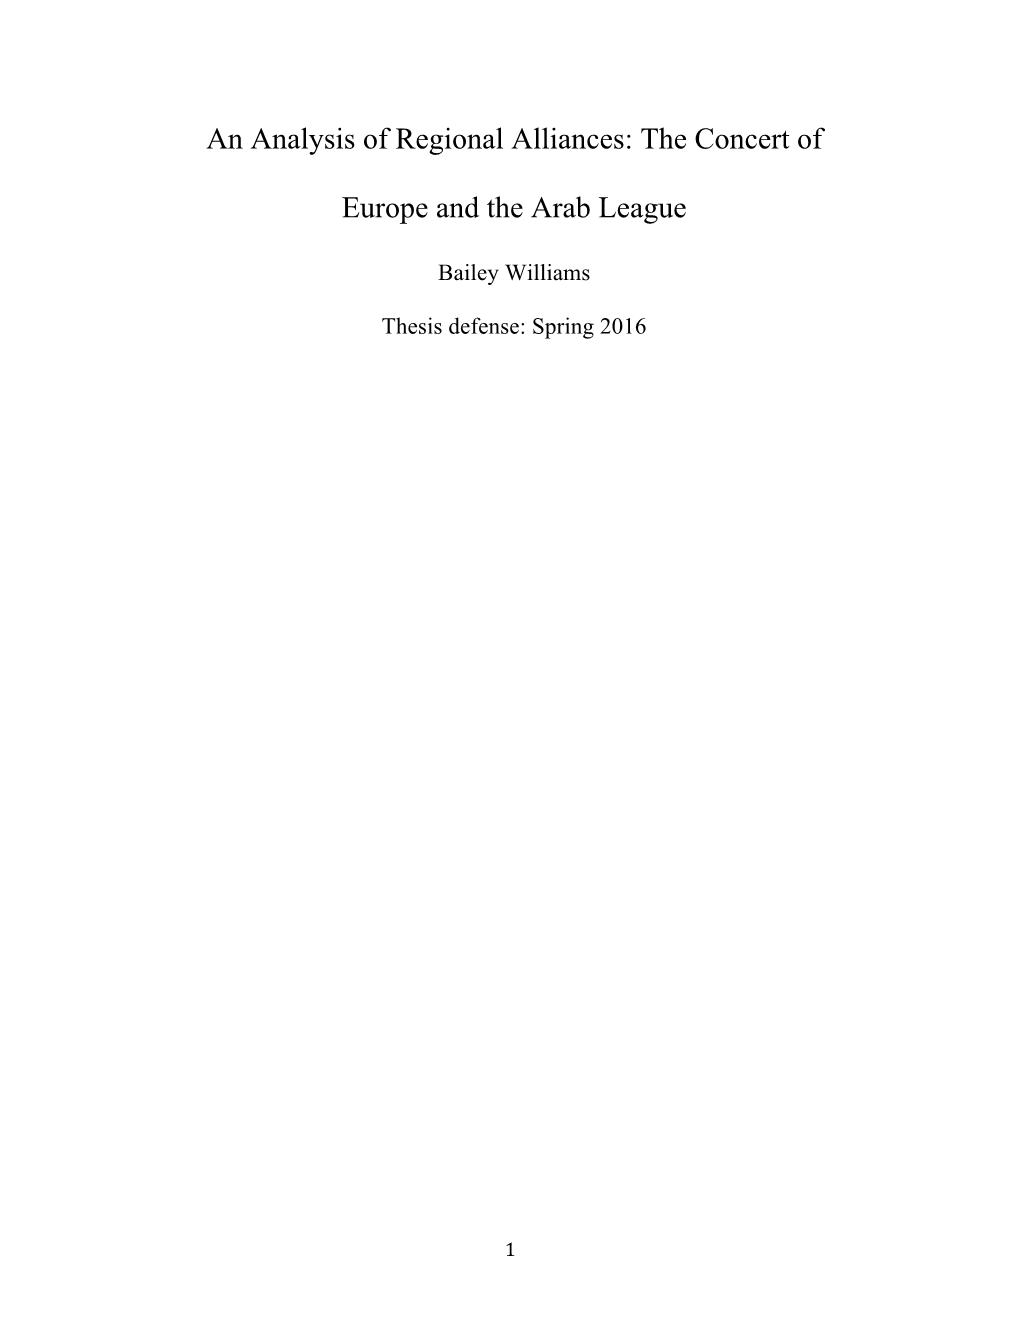 An Analysis of Regional Alliances: the Concert of Europe and the Arab League